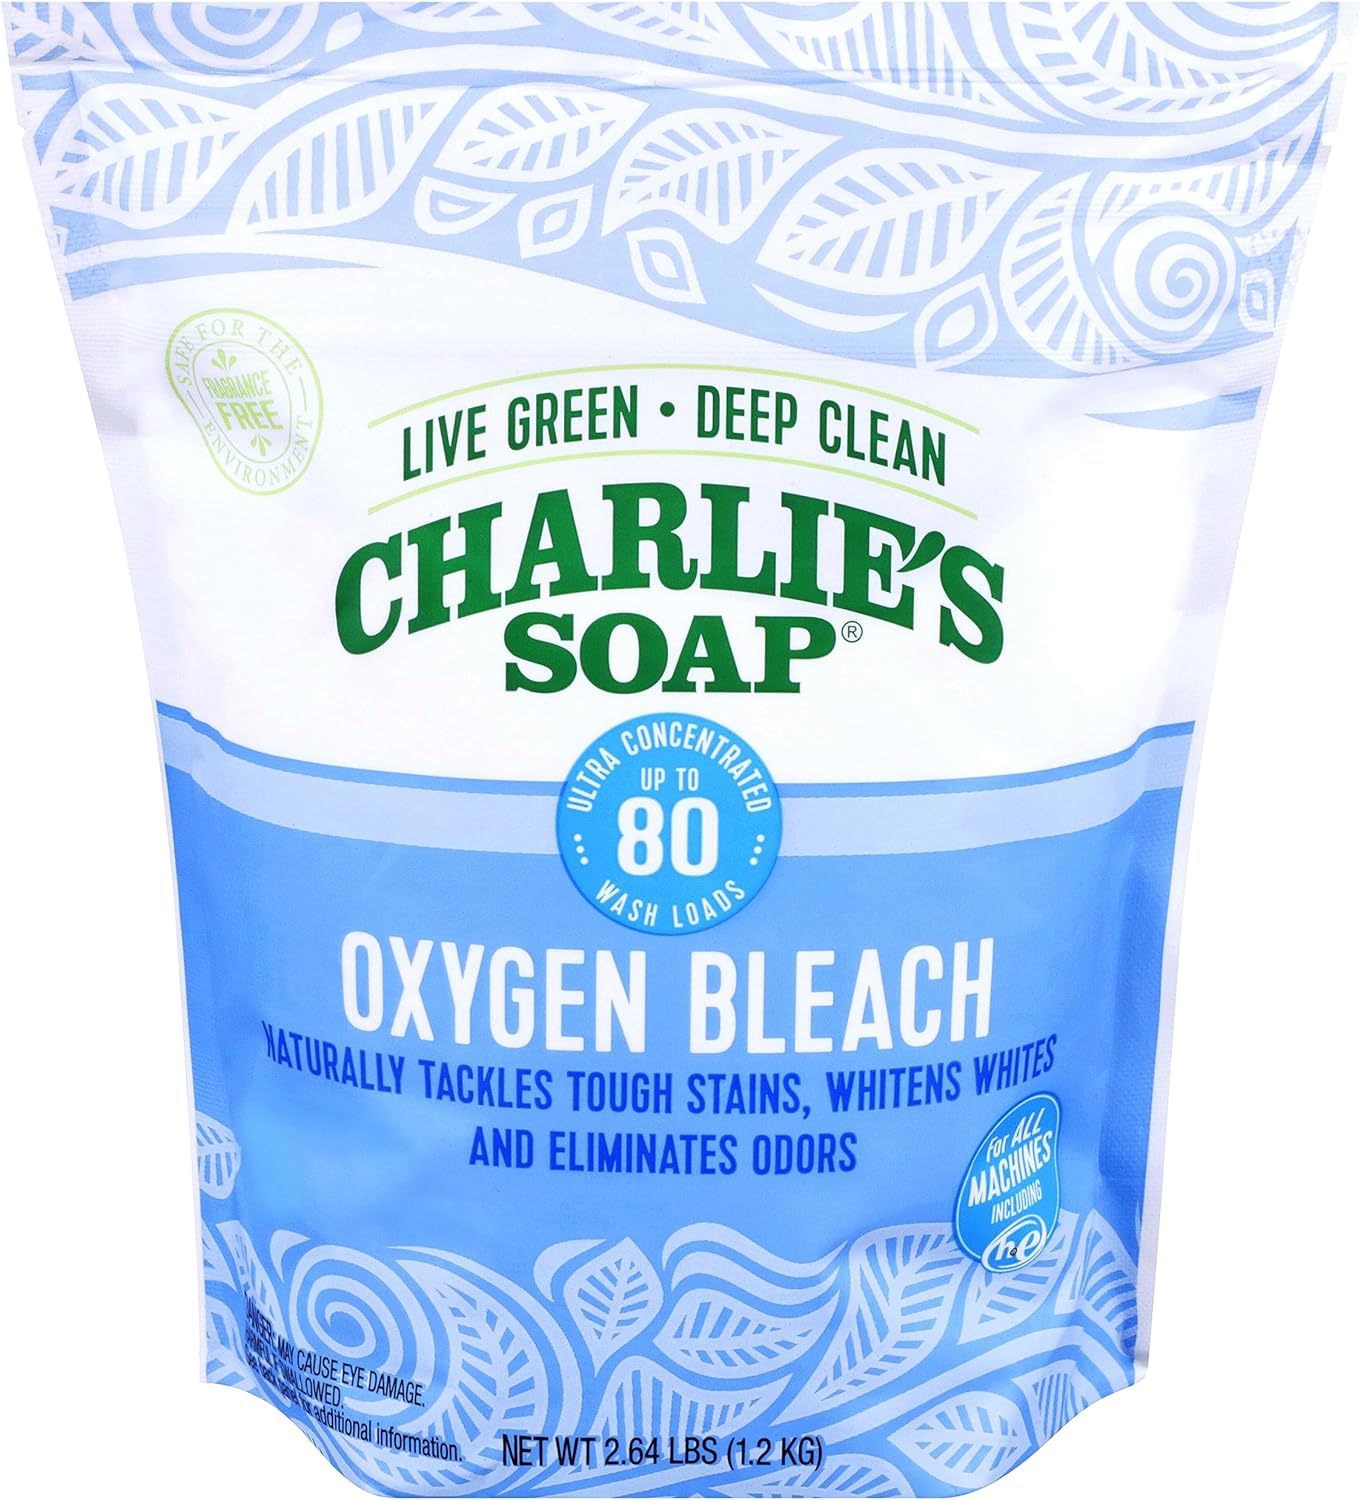 Charlie's Soap – Oxygen Bleach (2.64 Lbs., 1 Pack) Non-Chlorine Bleach Alternative Powder – Whiten Laundry & Remove Stains – Safer for Colors